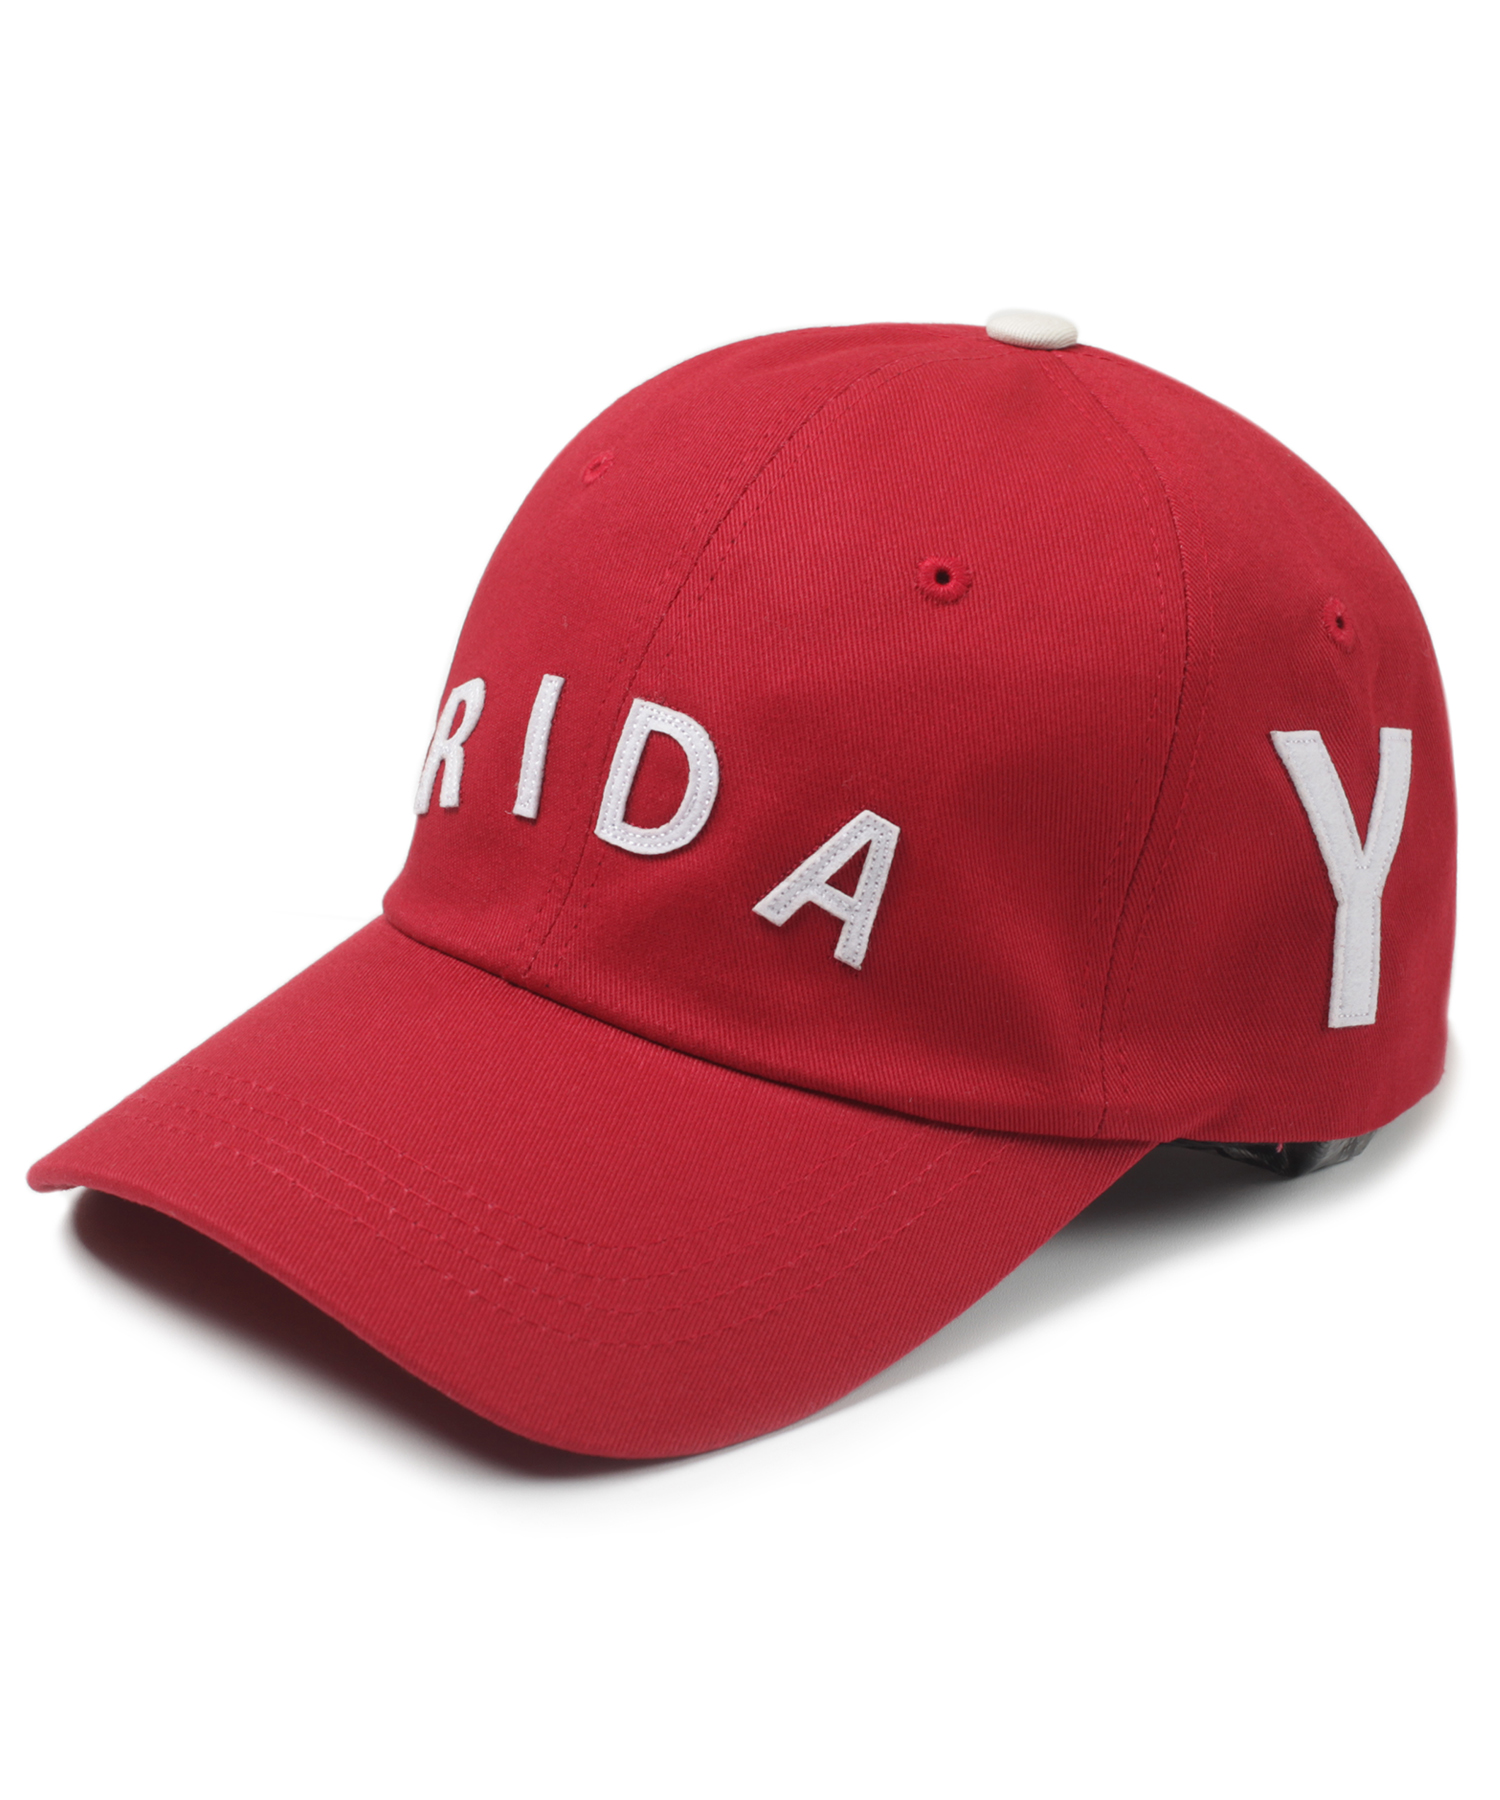 DAY ADJUST BALL CAP -RED